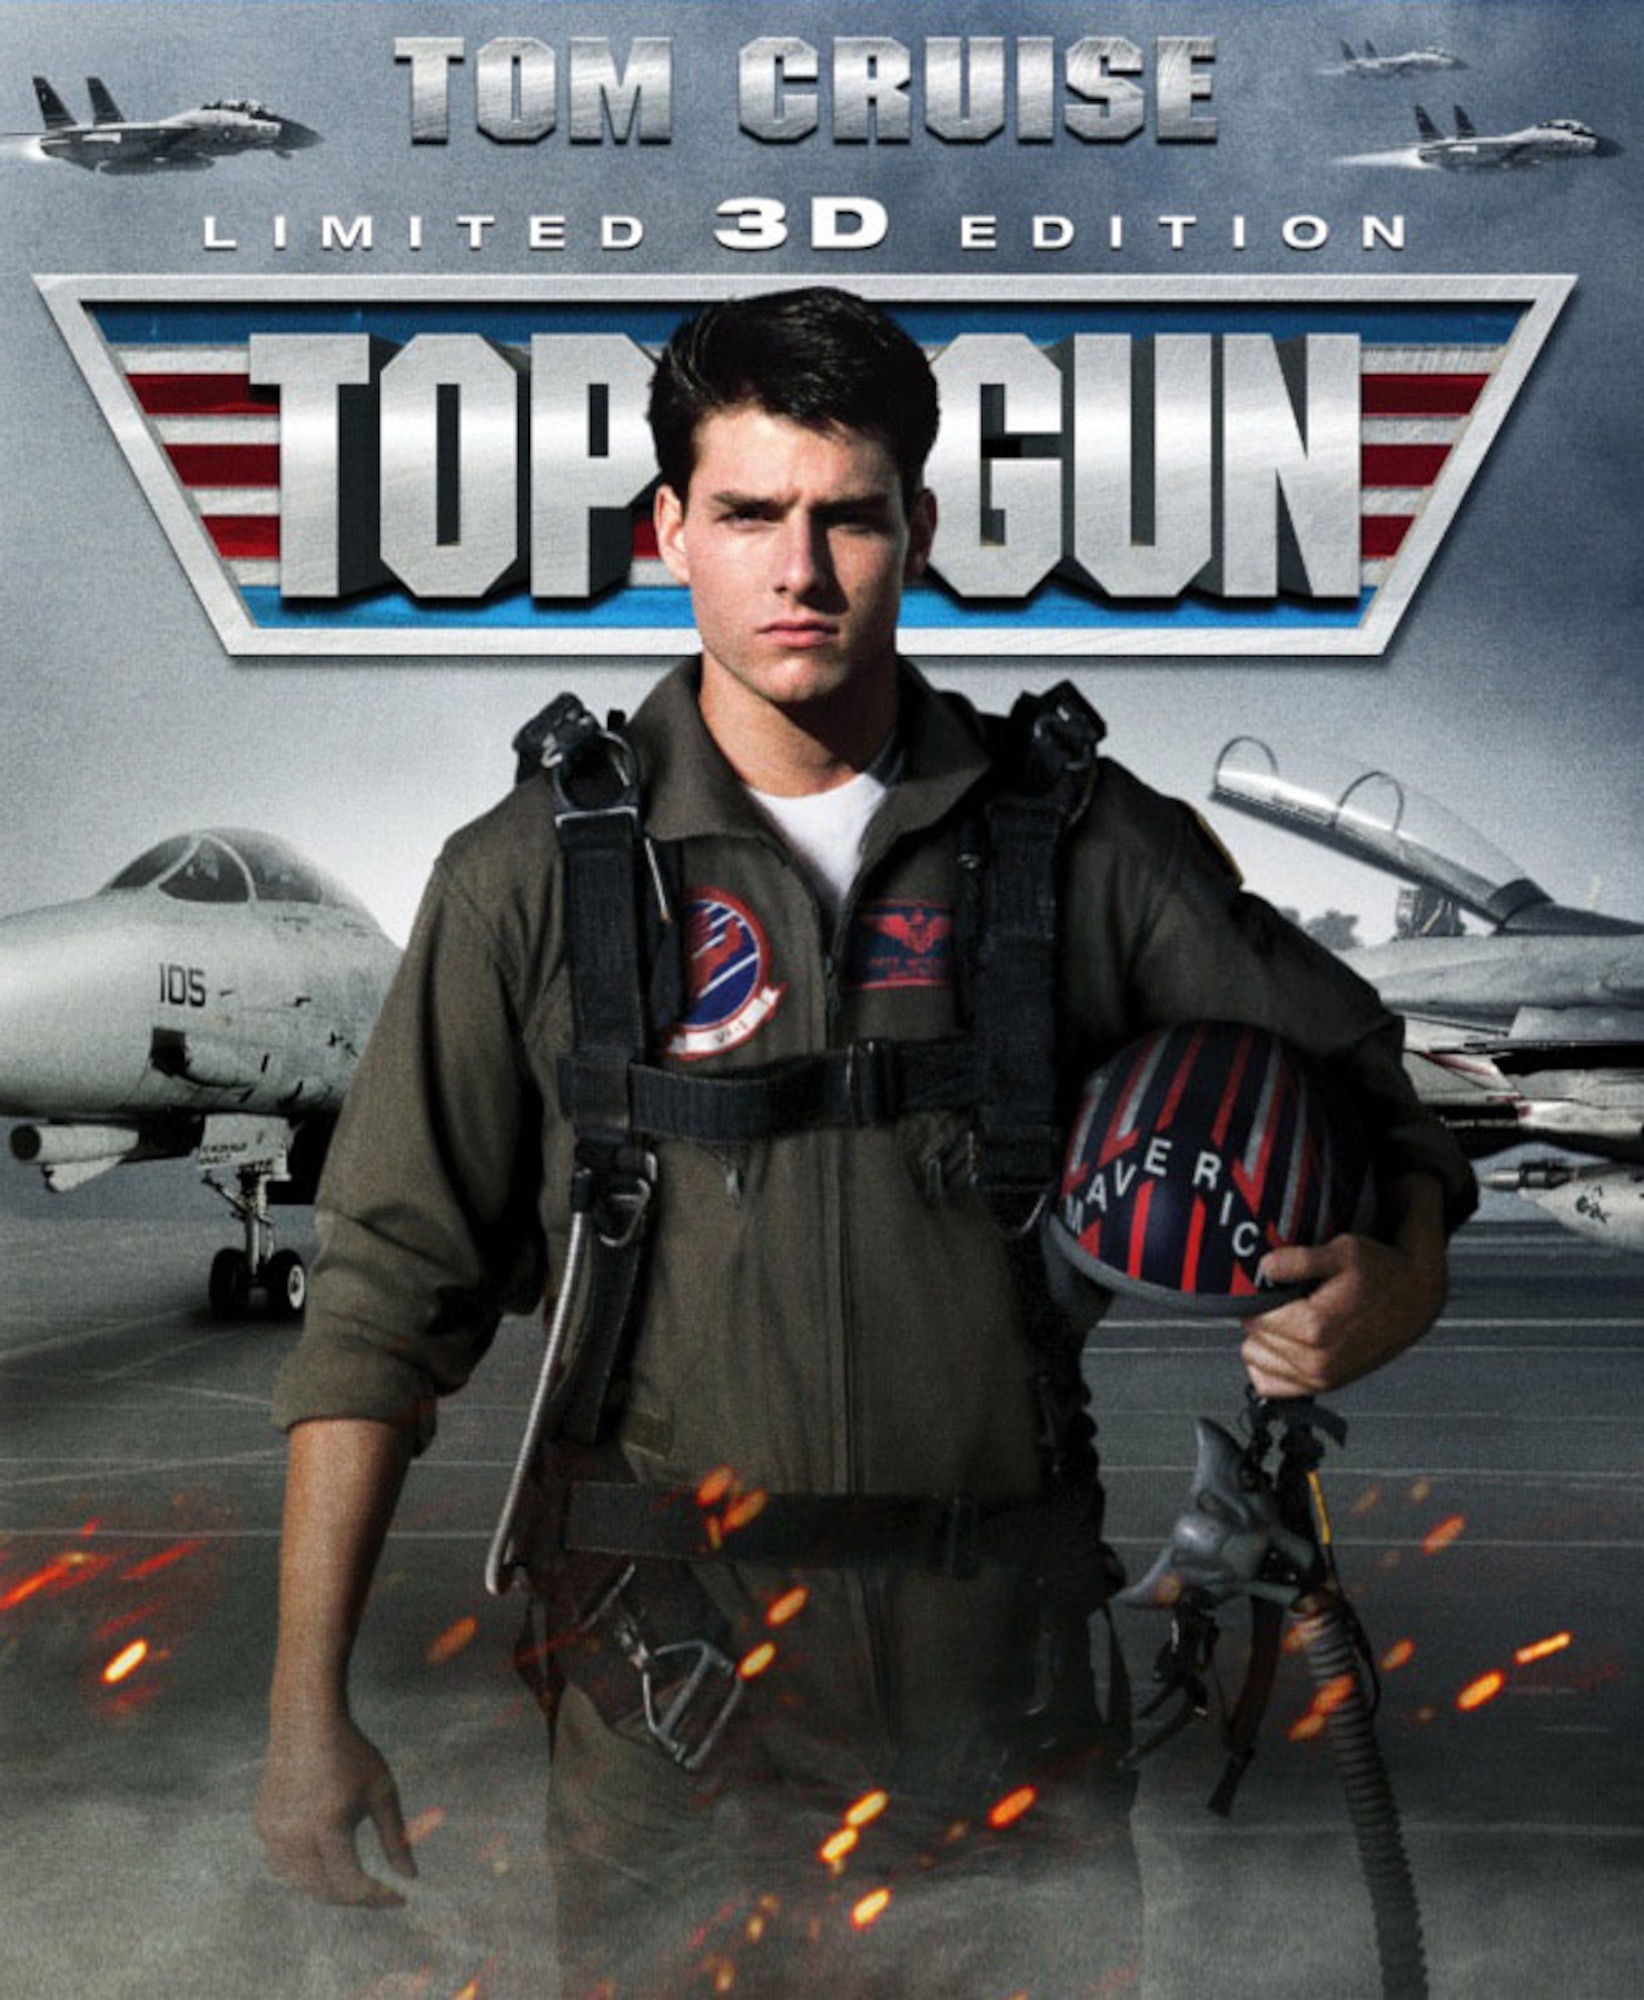 The Air Force Museum Theatre will show "Top Gun 3D" at 4 p.m. on Nov. 22, 2015, as part of its Hollywood Series, sponsored by Cassano's Pizza King.